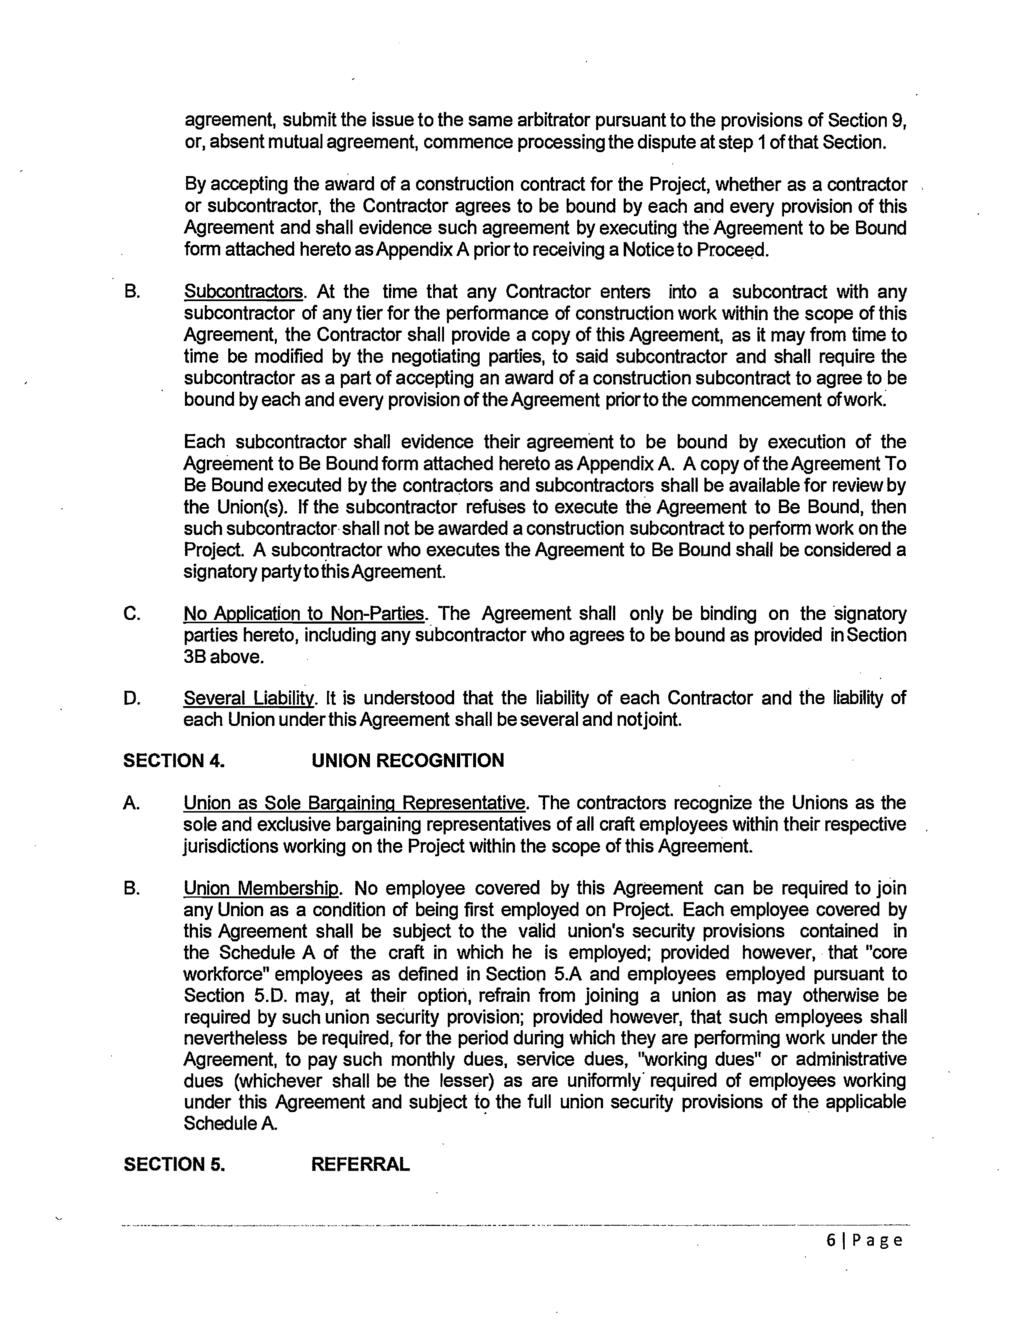 agreement, submit the issue to the same arbitrator pursuant to the provisions of Section 9, or, absent mutual agreement, commence processing the dispute at step 1 of that Section.